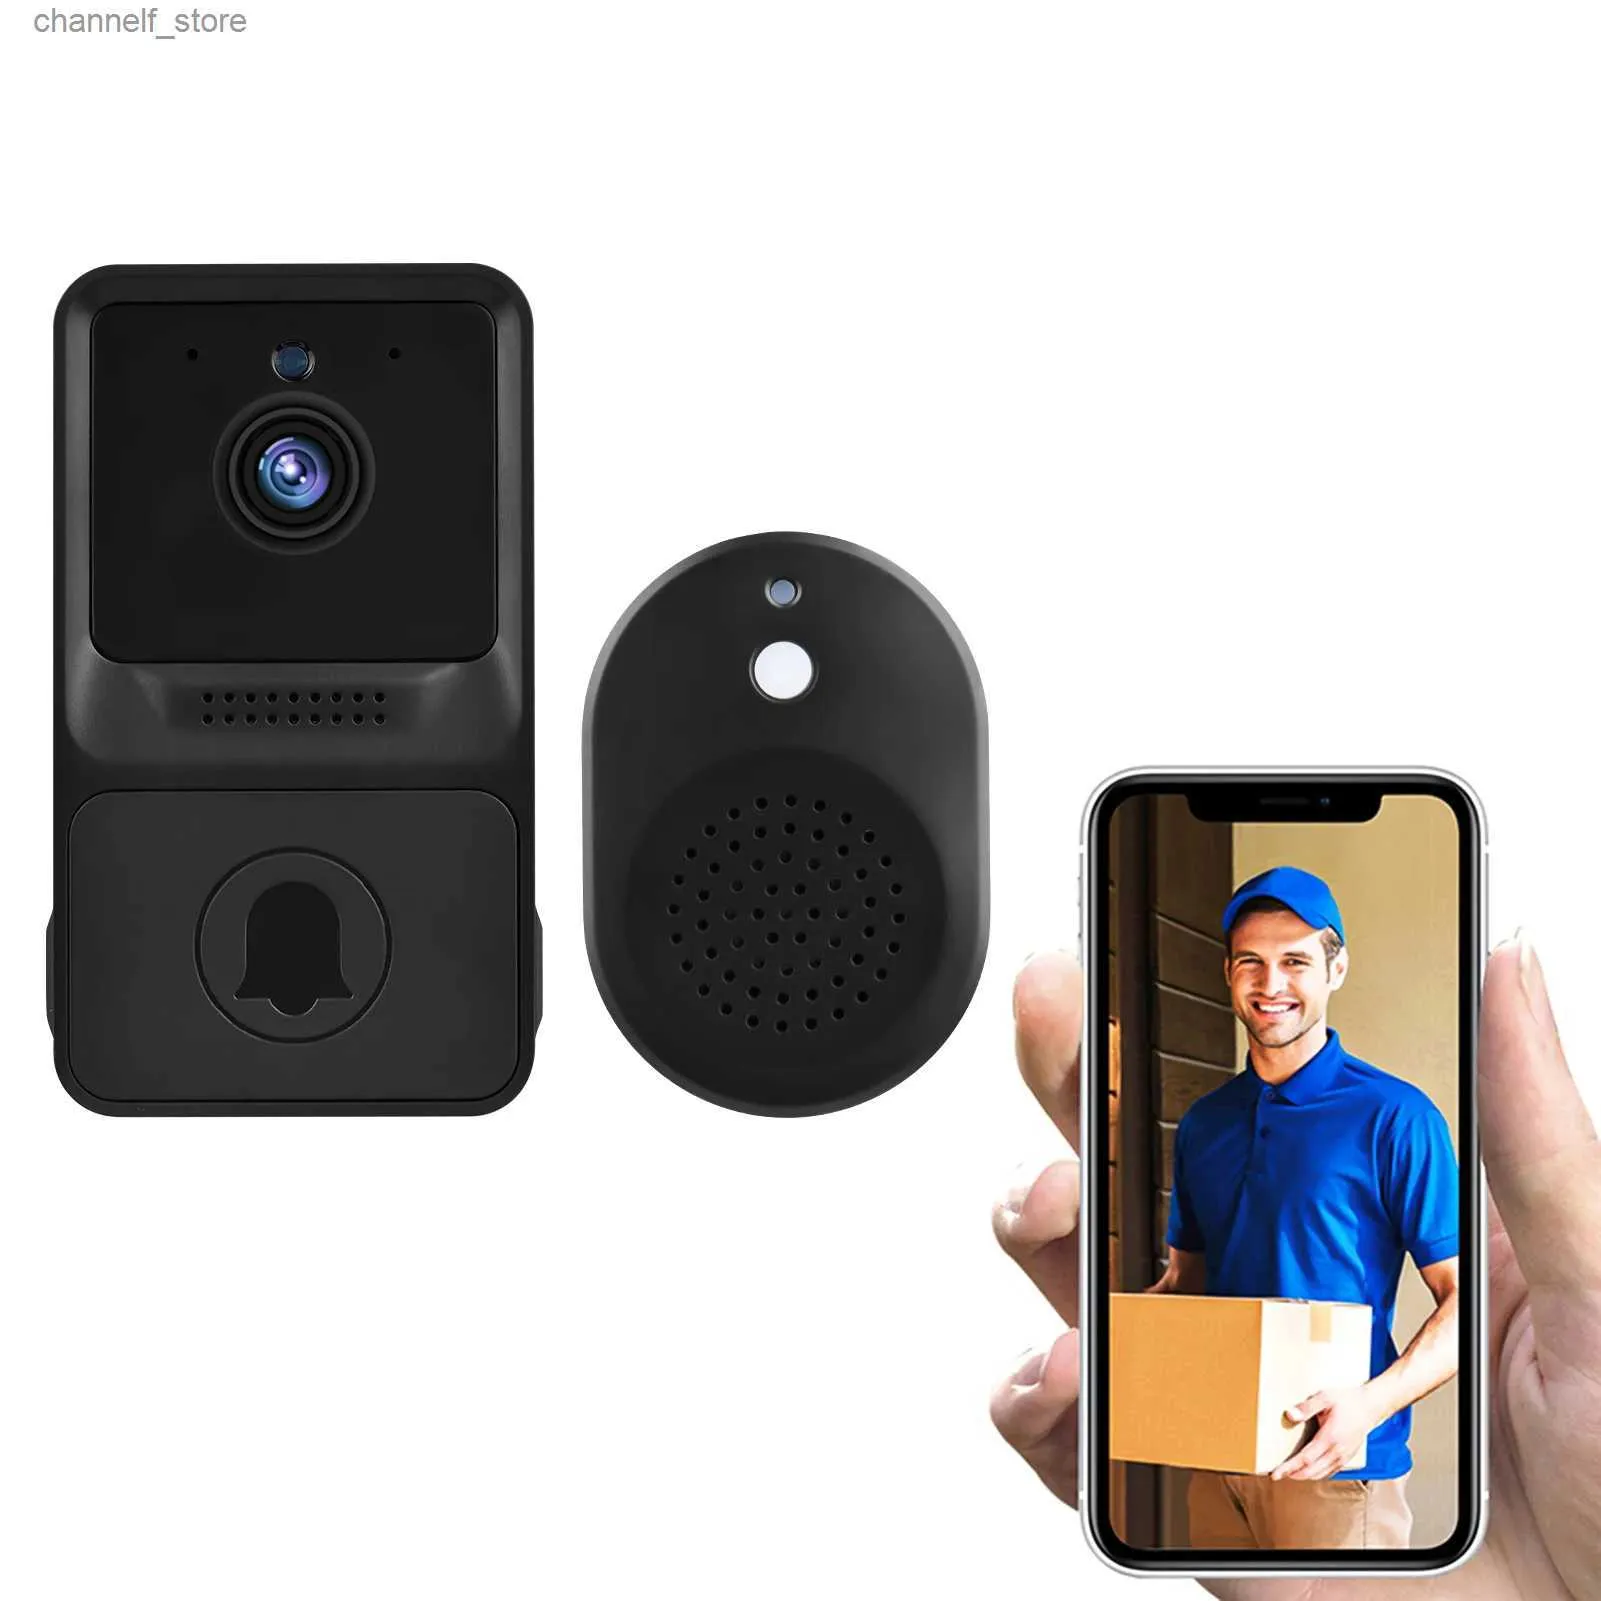 Doorbells High definition highresolution visual intelligent security doorbell camera wireless video doorbell with infrared night vision realtime monitoringY2